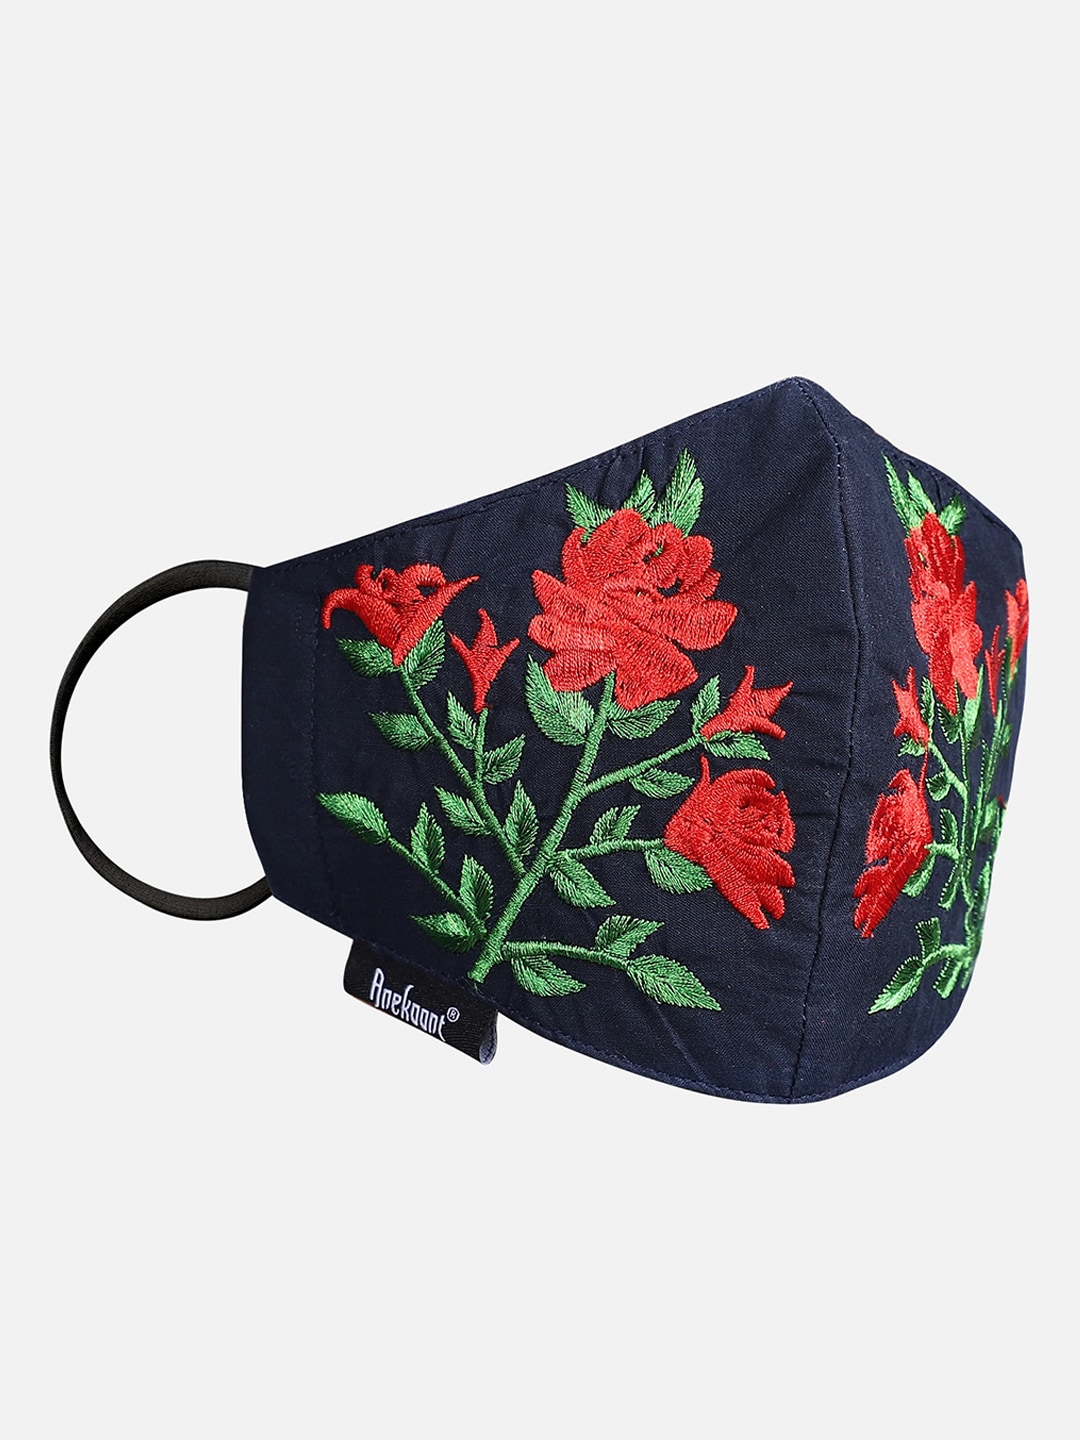 Anekaant Women Navy Blue & Red Floral Embroidered 3-Ply Reusable Fabric Fashion Mask Price in India